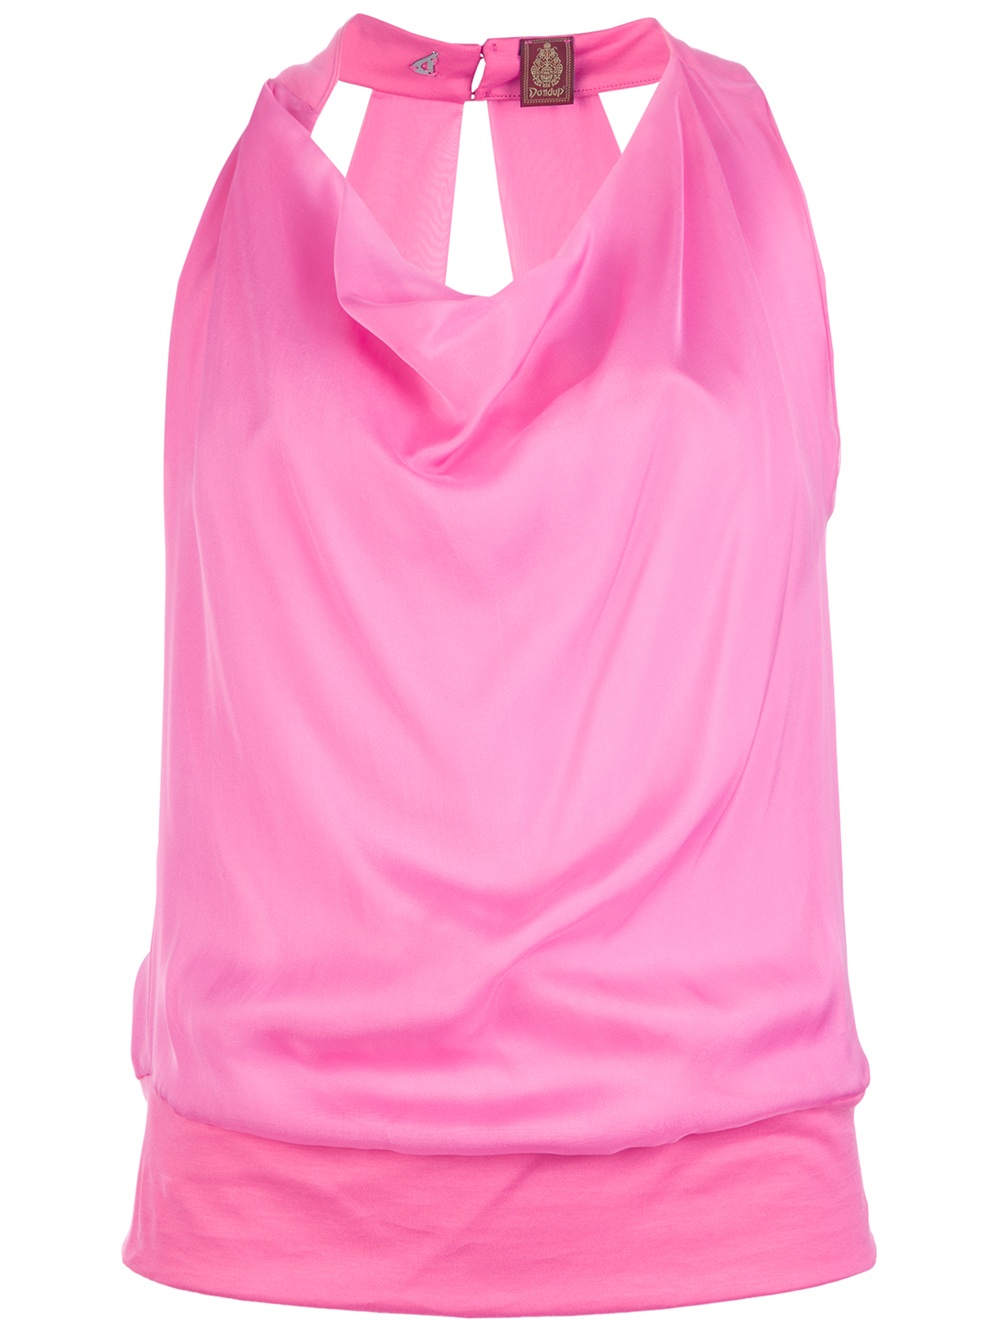 Lyst - Dondup Sleeveless Top in Pink